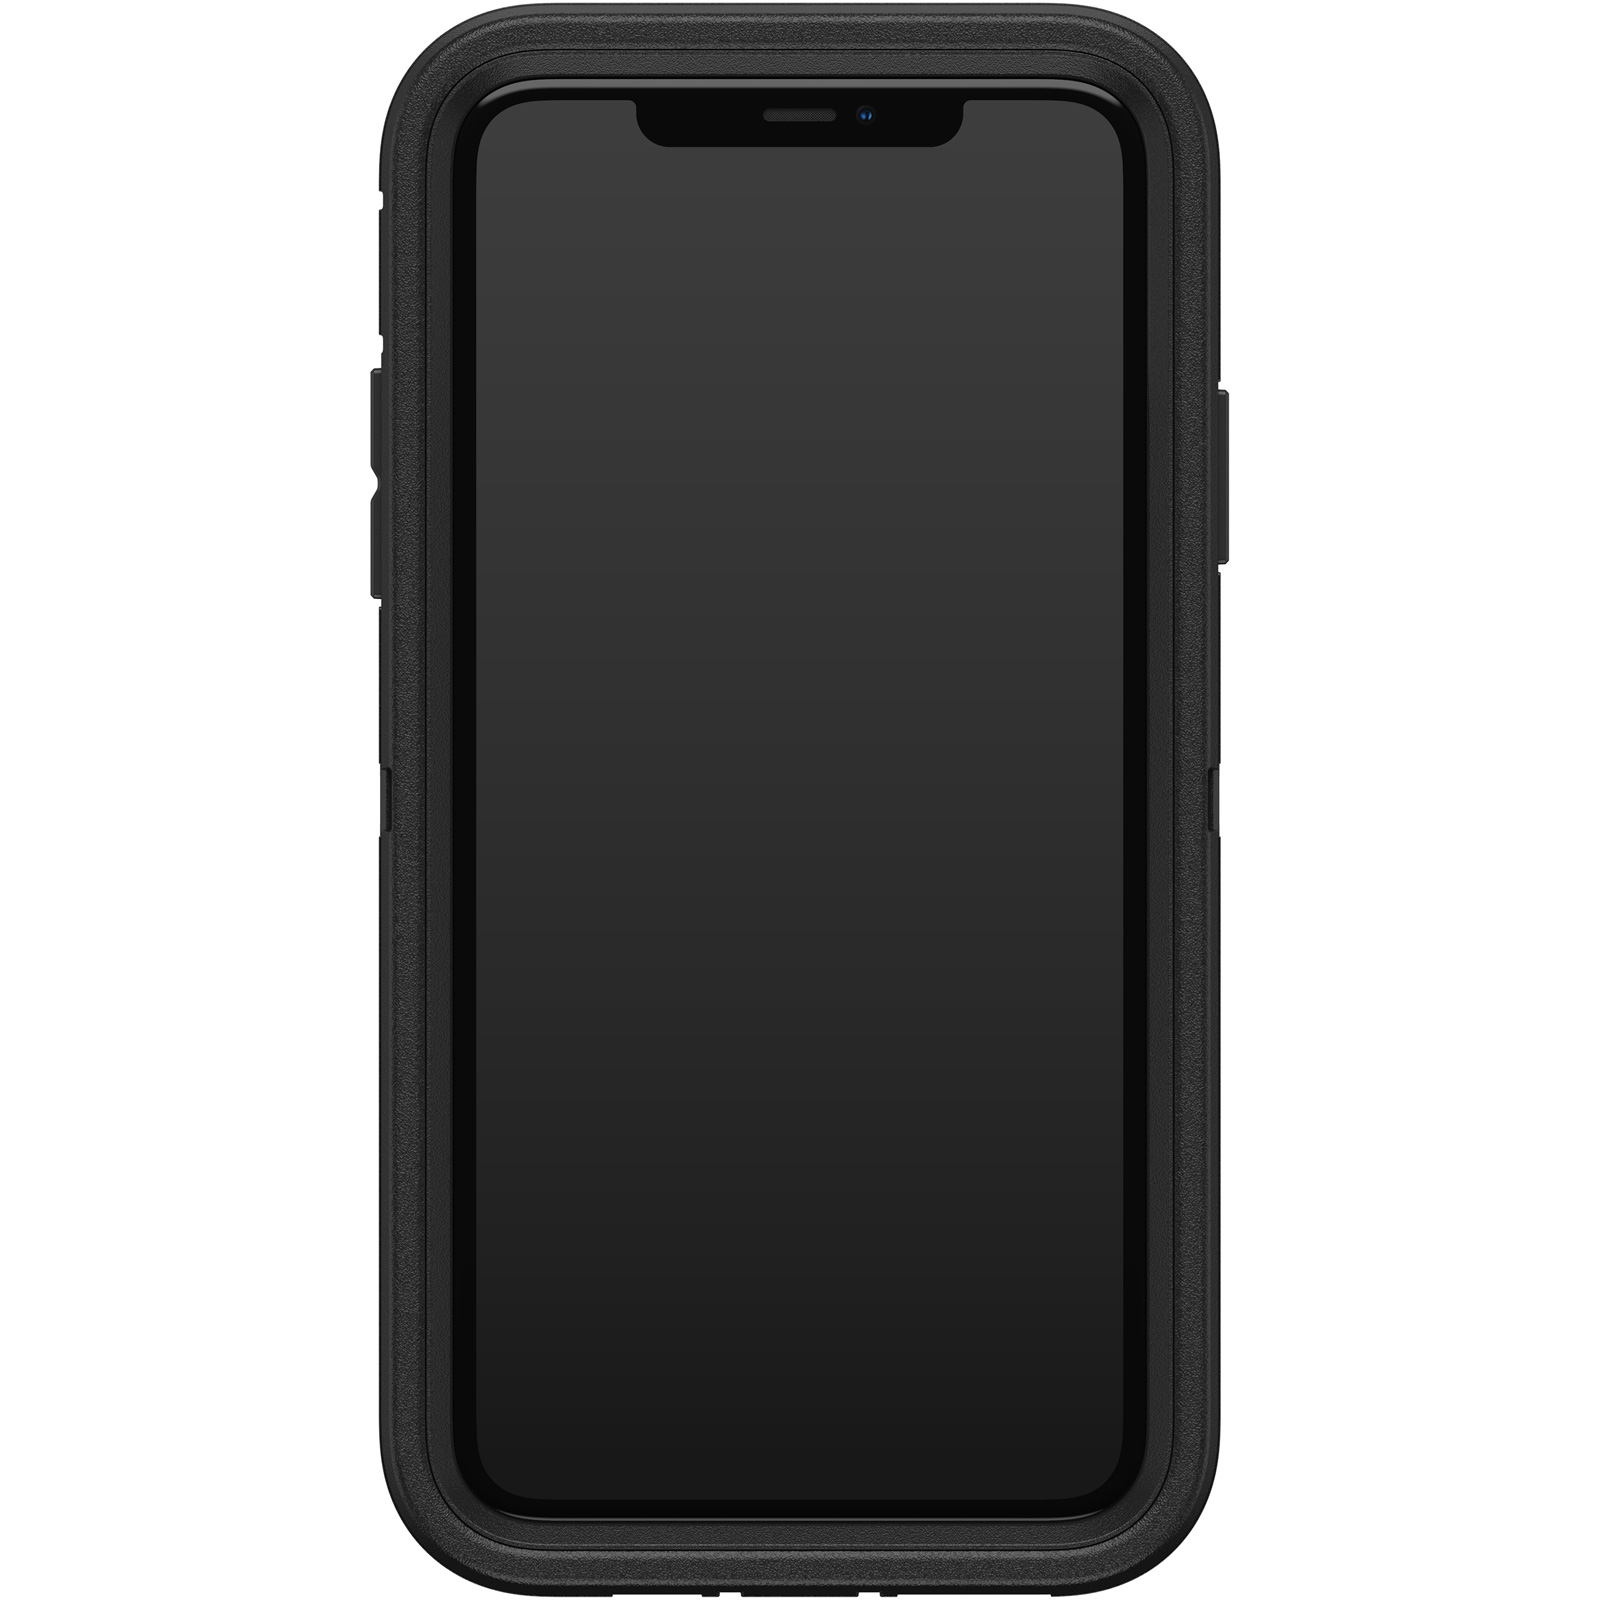 OtterBox Defender Series Case for iPhone 11 Pro Max - BLACK.